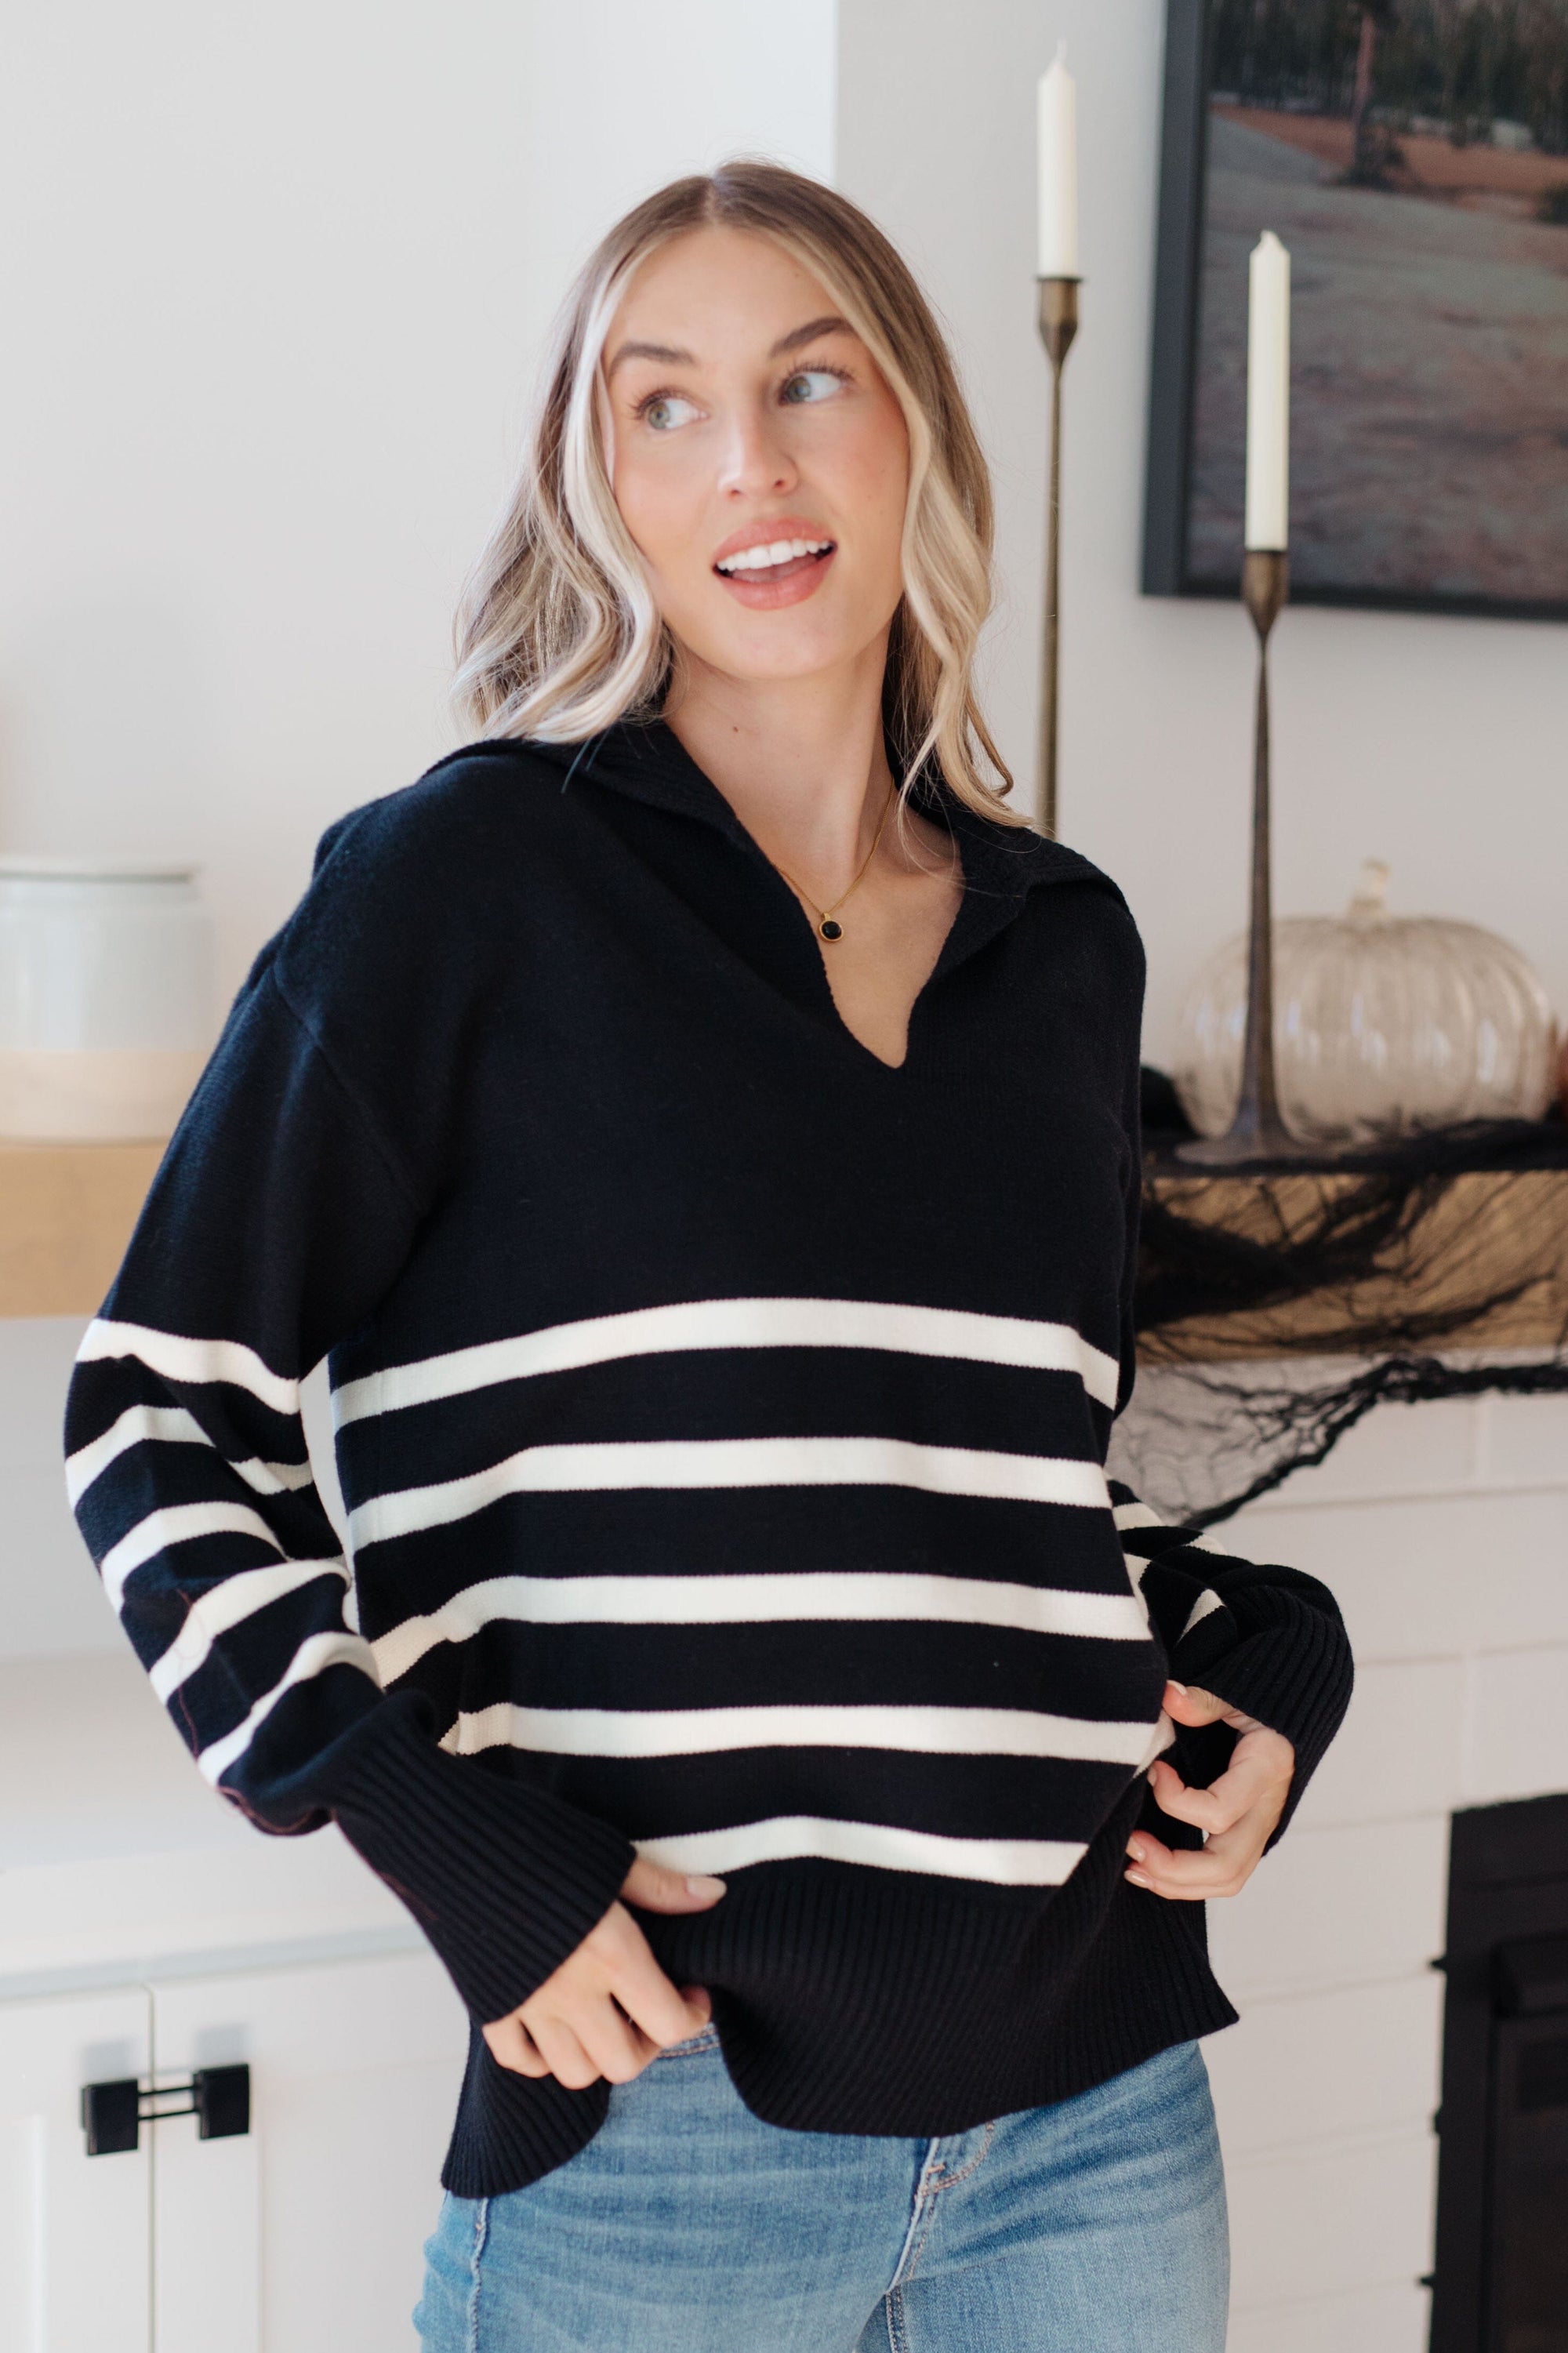 From Here On Out Striped Sweater Womens Ave Shops 